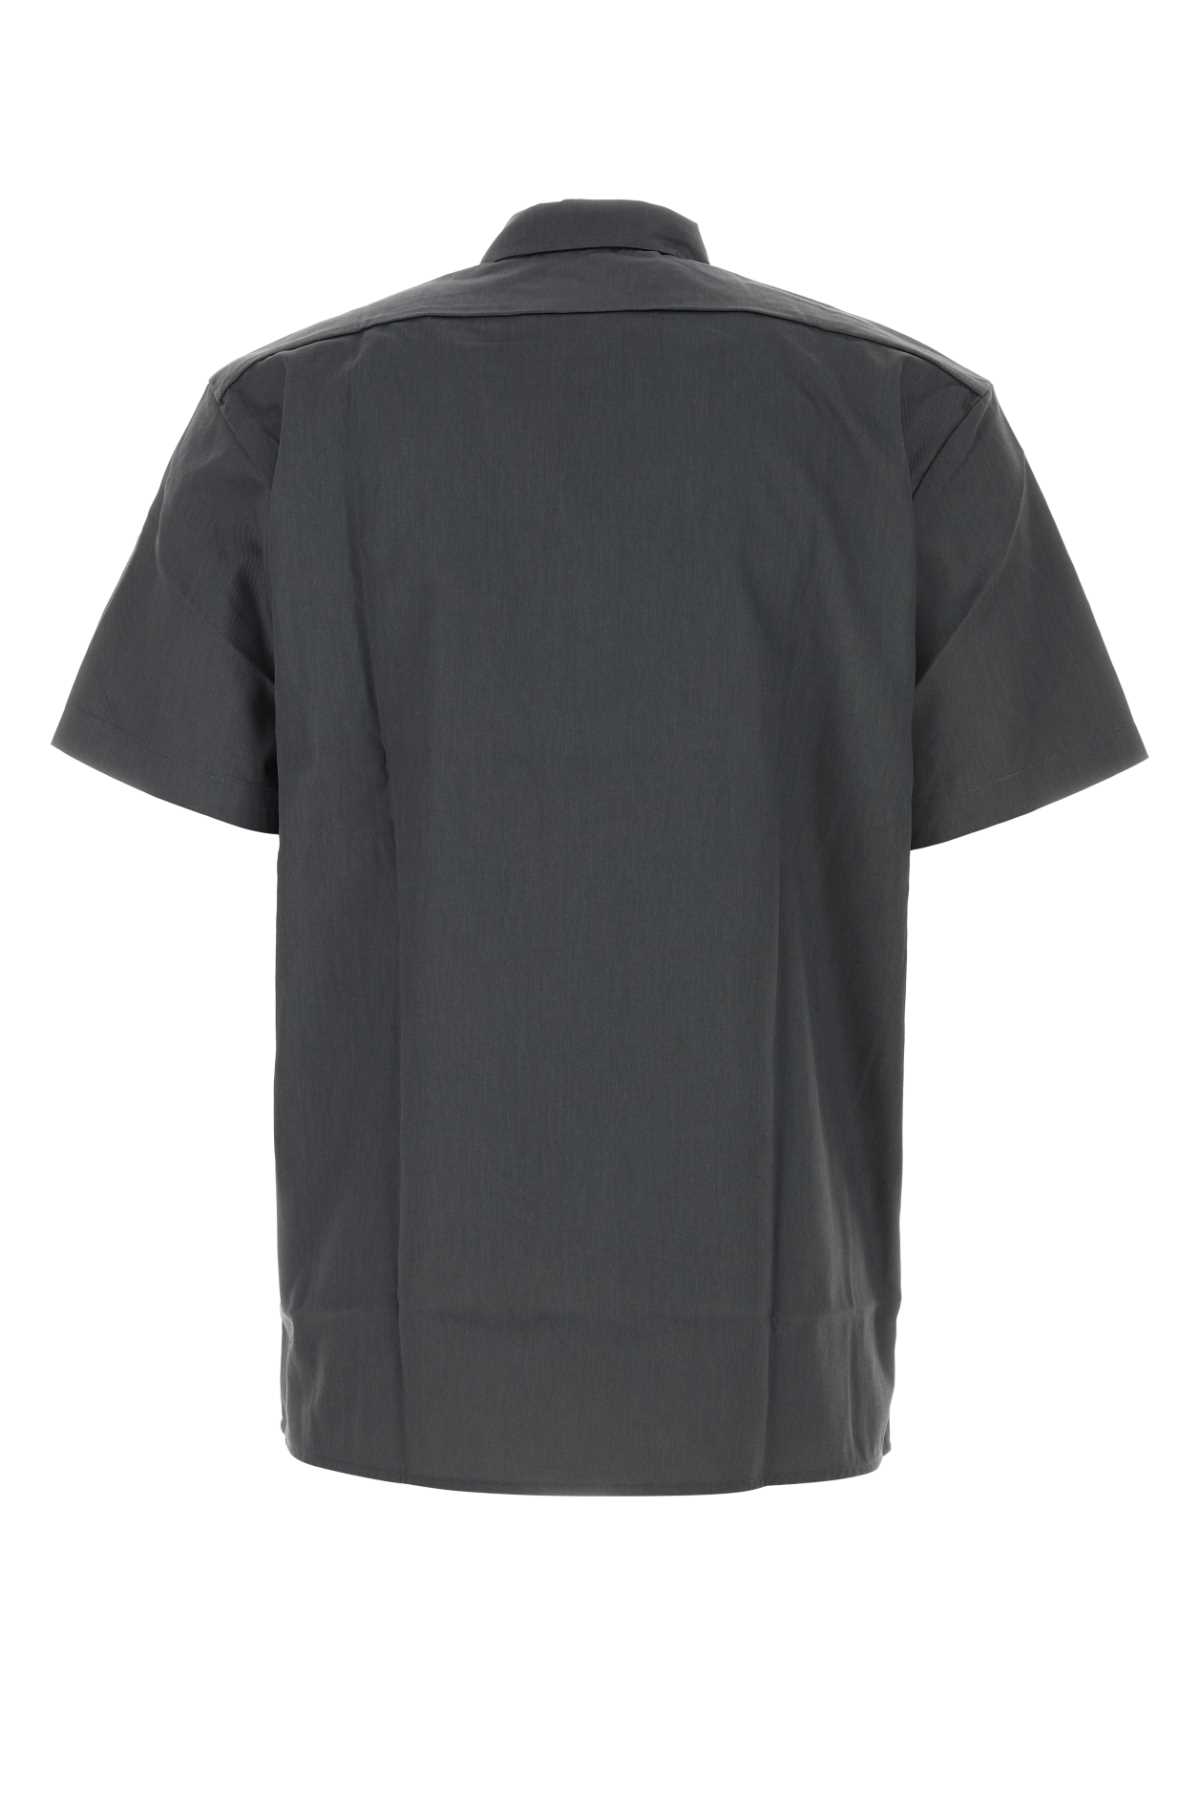 Dickies Graphite Polyester Blend Shirt In Charcoalgrey